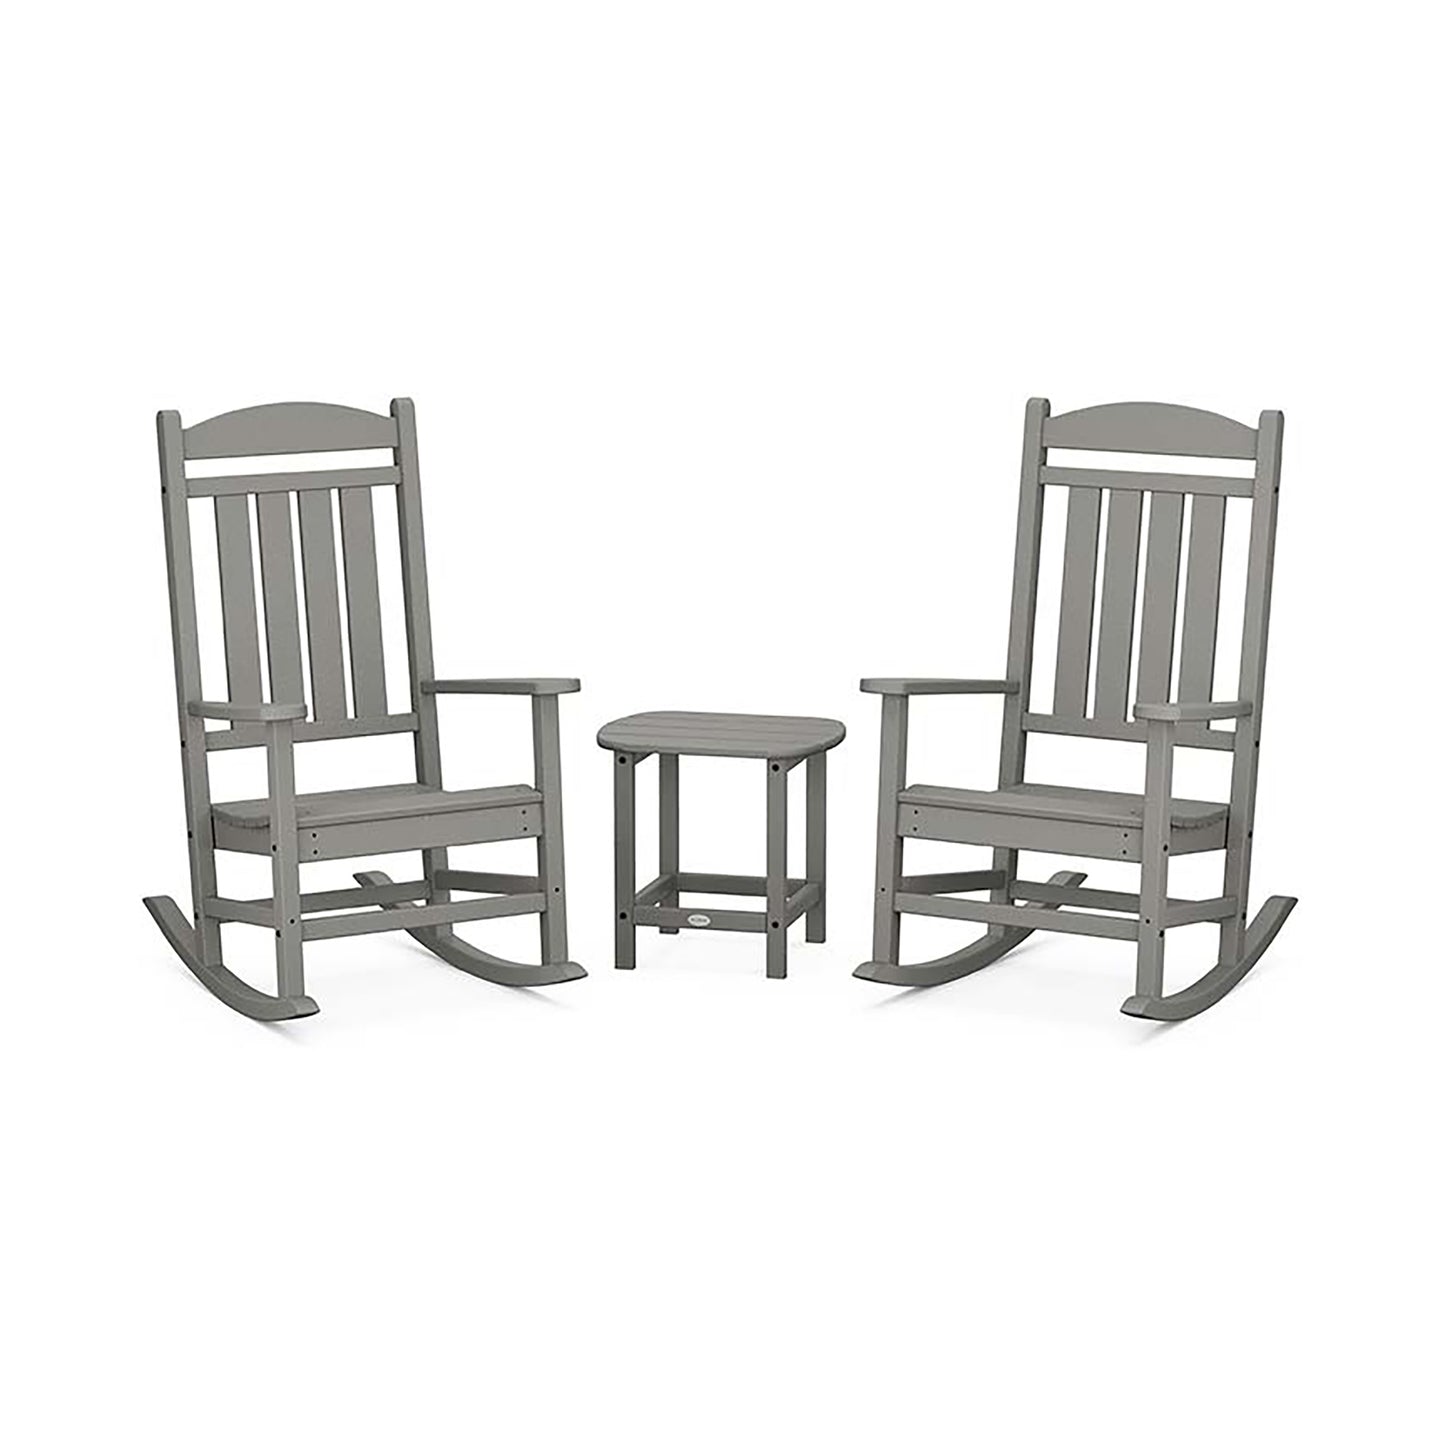 Two gray POLYWOOD Presidential Outdoor Rocking Chair 3-Piece Sets facing each other with a small round table in between, set against a plain white background.